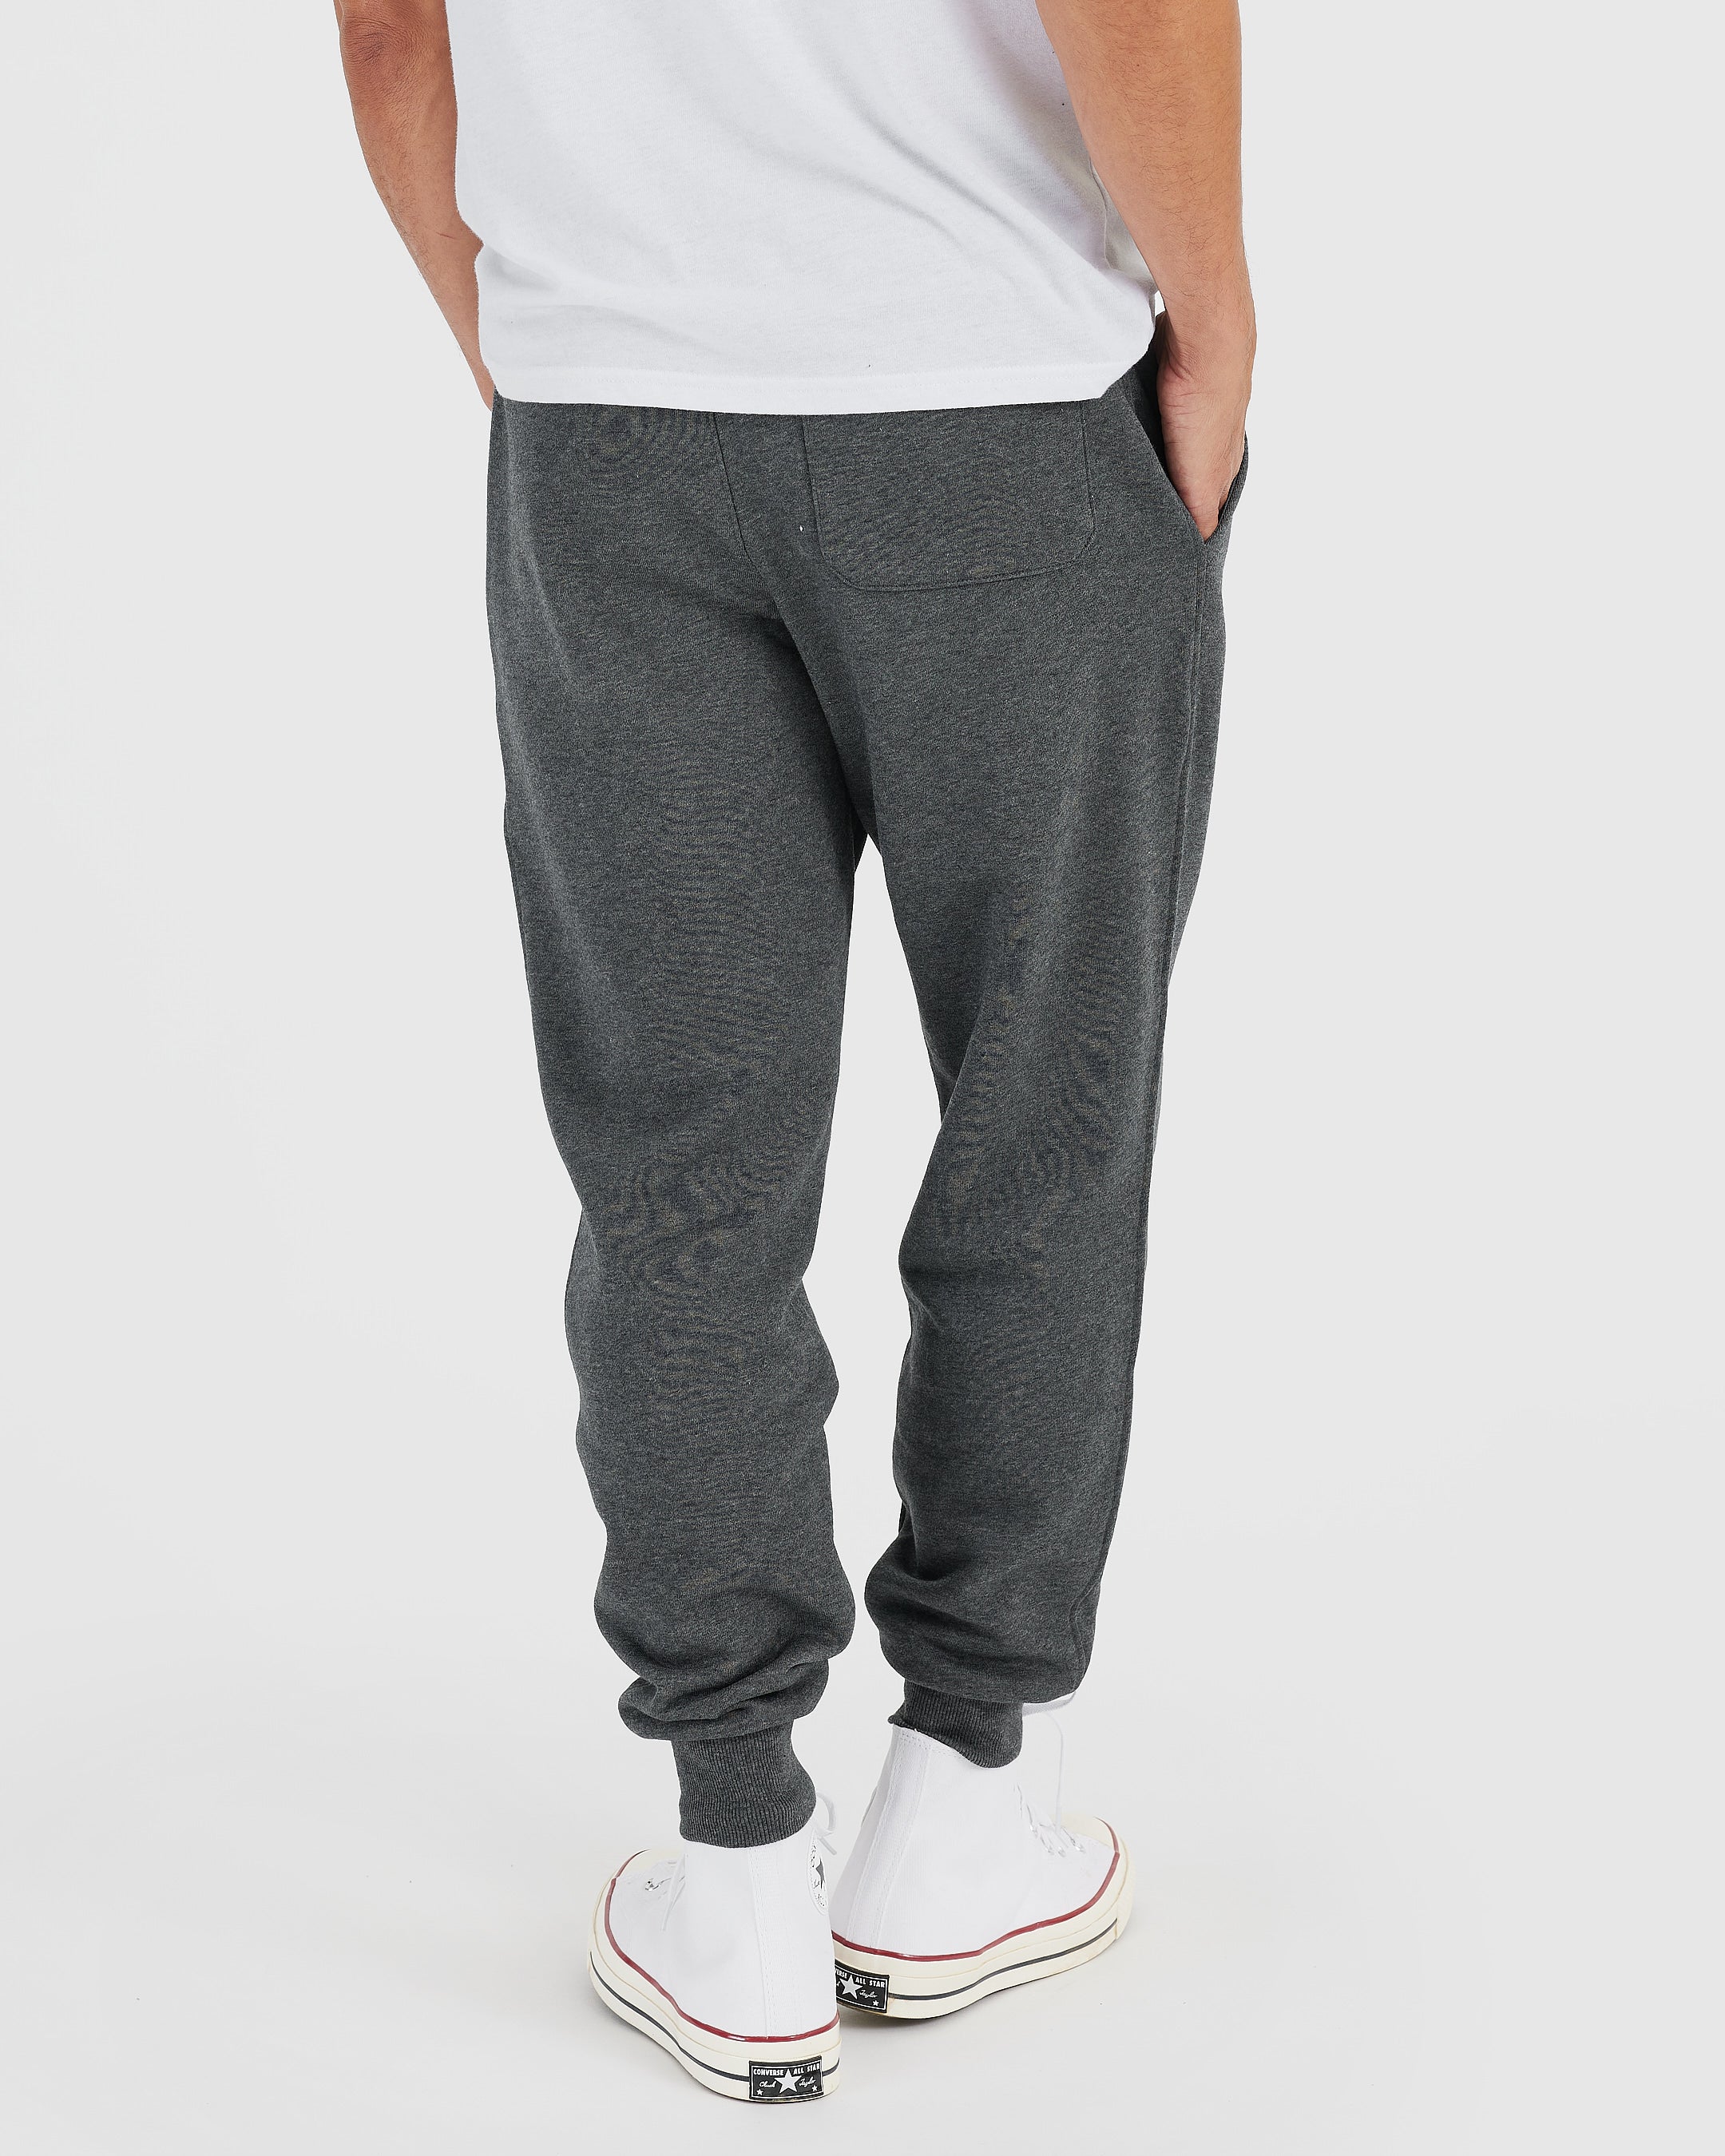 Terry | French Classic Gray French | Jogger Gray Jogger Charcoal Terry Charcoal True Fleece Fleece